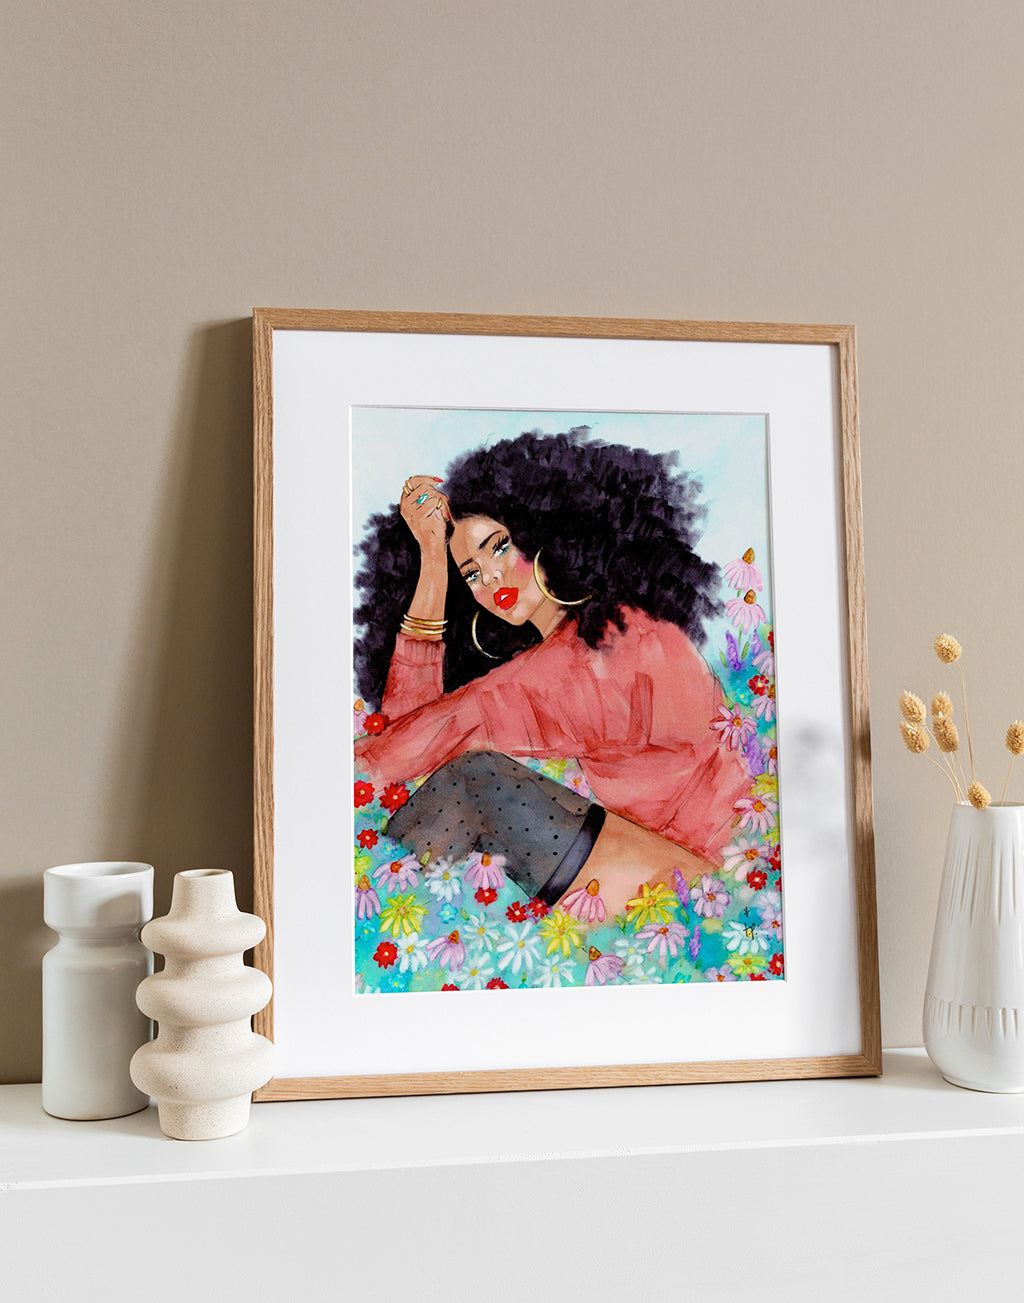 Illustration in a light frame of a beautiful woman with big natural hair sitting in field of wildflowers by Tatiana Poblah